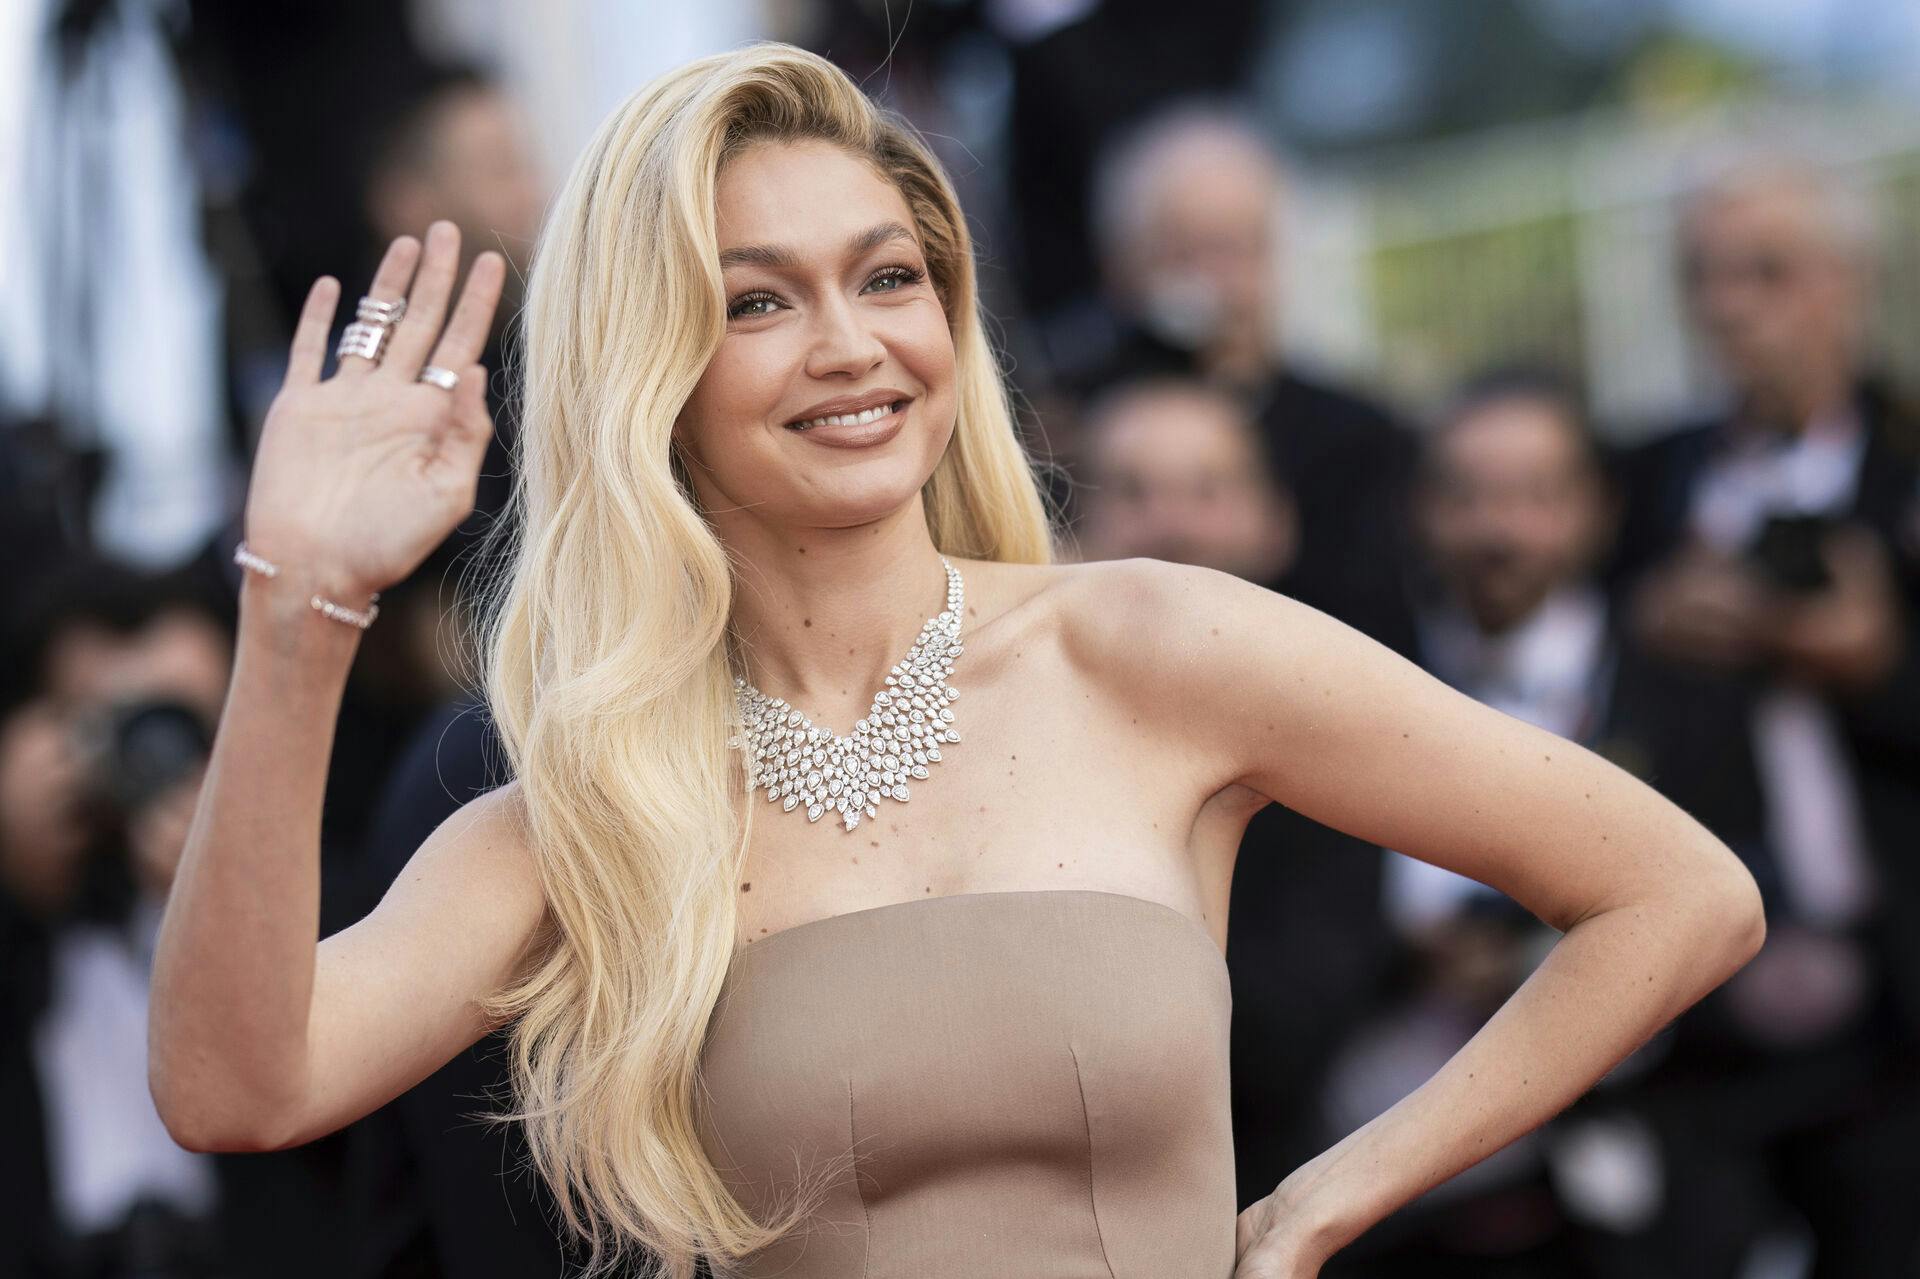 Gigi Hadid poses for photographers upon arrival at the premiere of the film 'Firebrand' at the 76th international film festival, Cannes, southern France, Sunday, May 21, 2023. (Photo by Vianney Le Caer/Invision/AP)